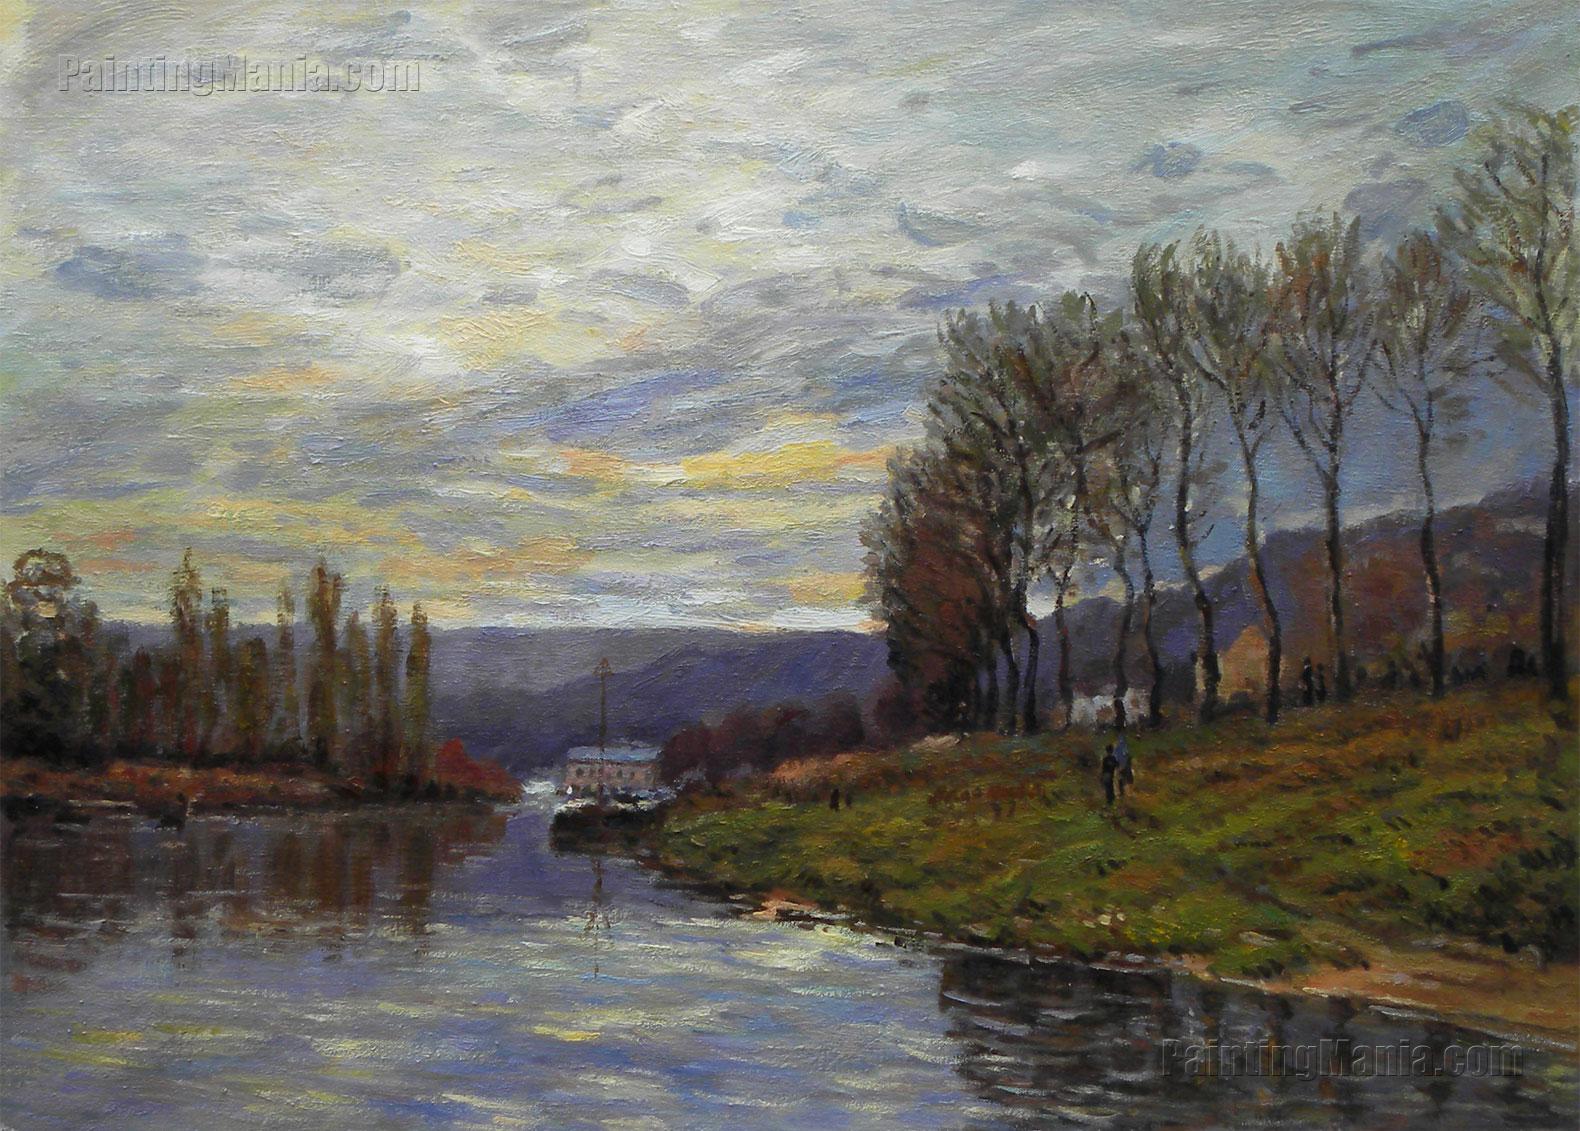 Seine at Bougival